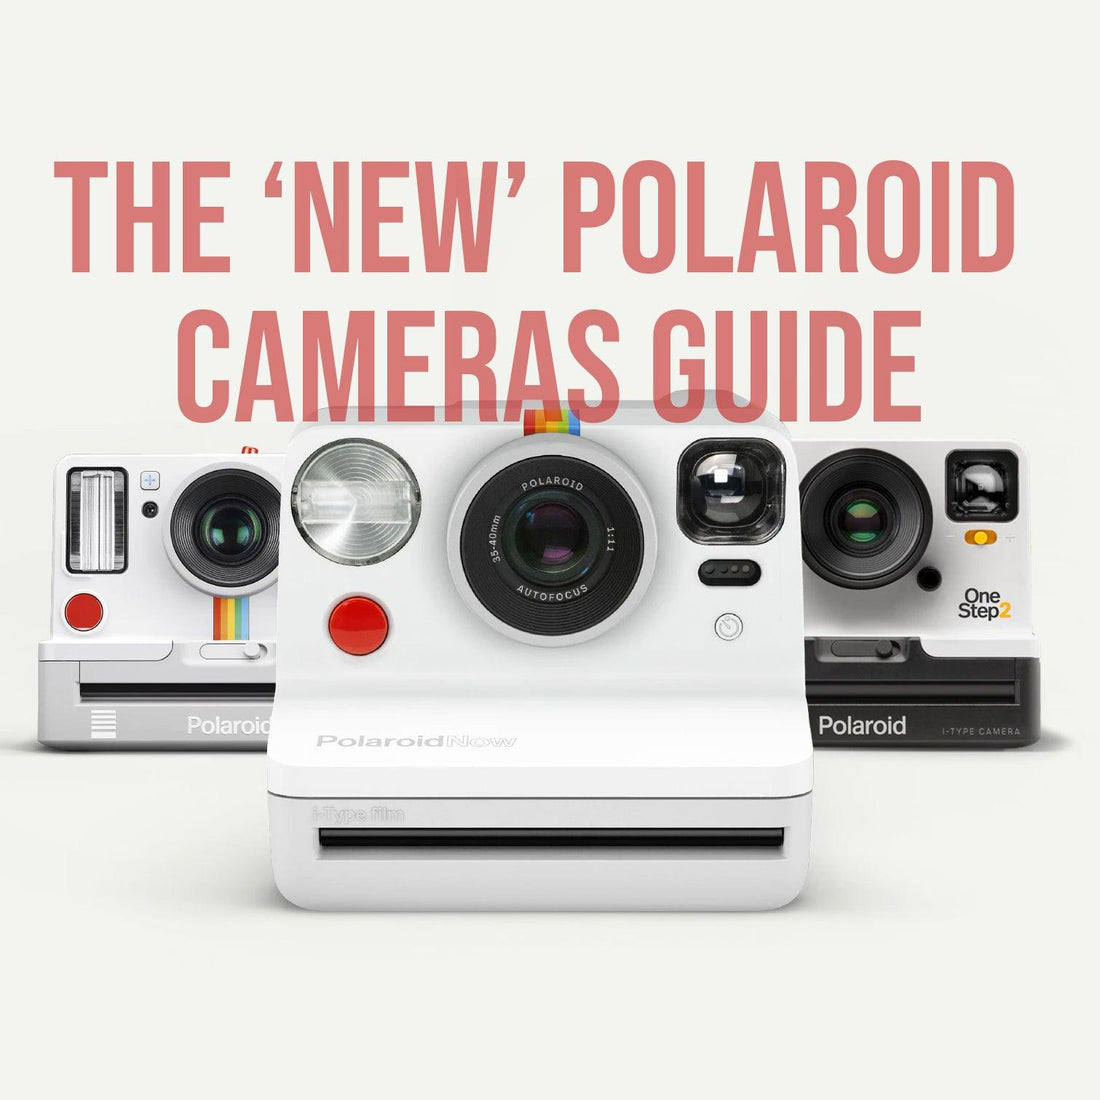 The 'New' Polaroid Cameras Guide - 8storeytree